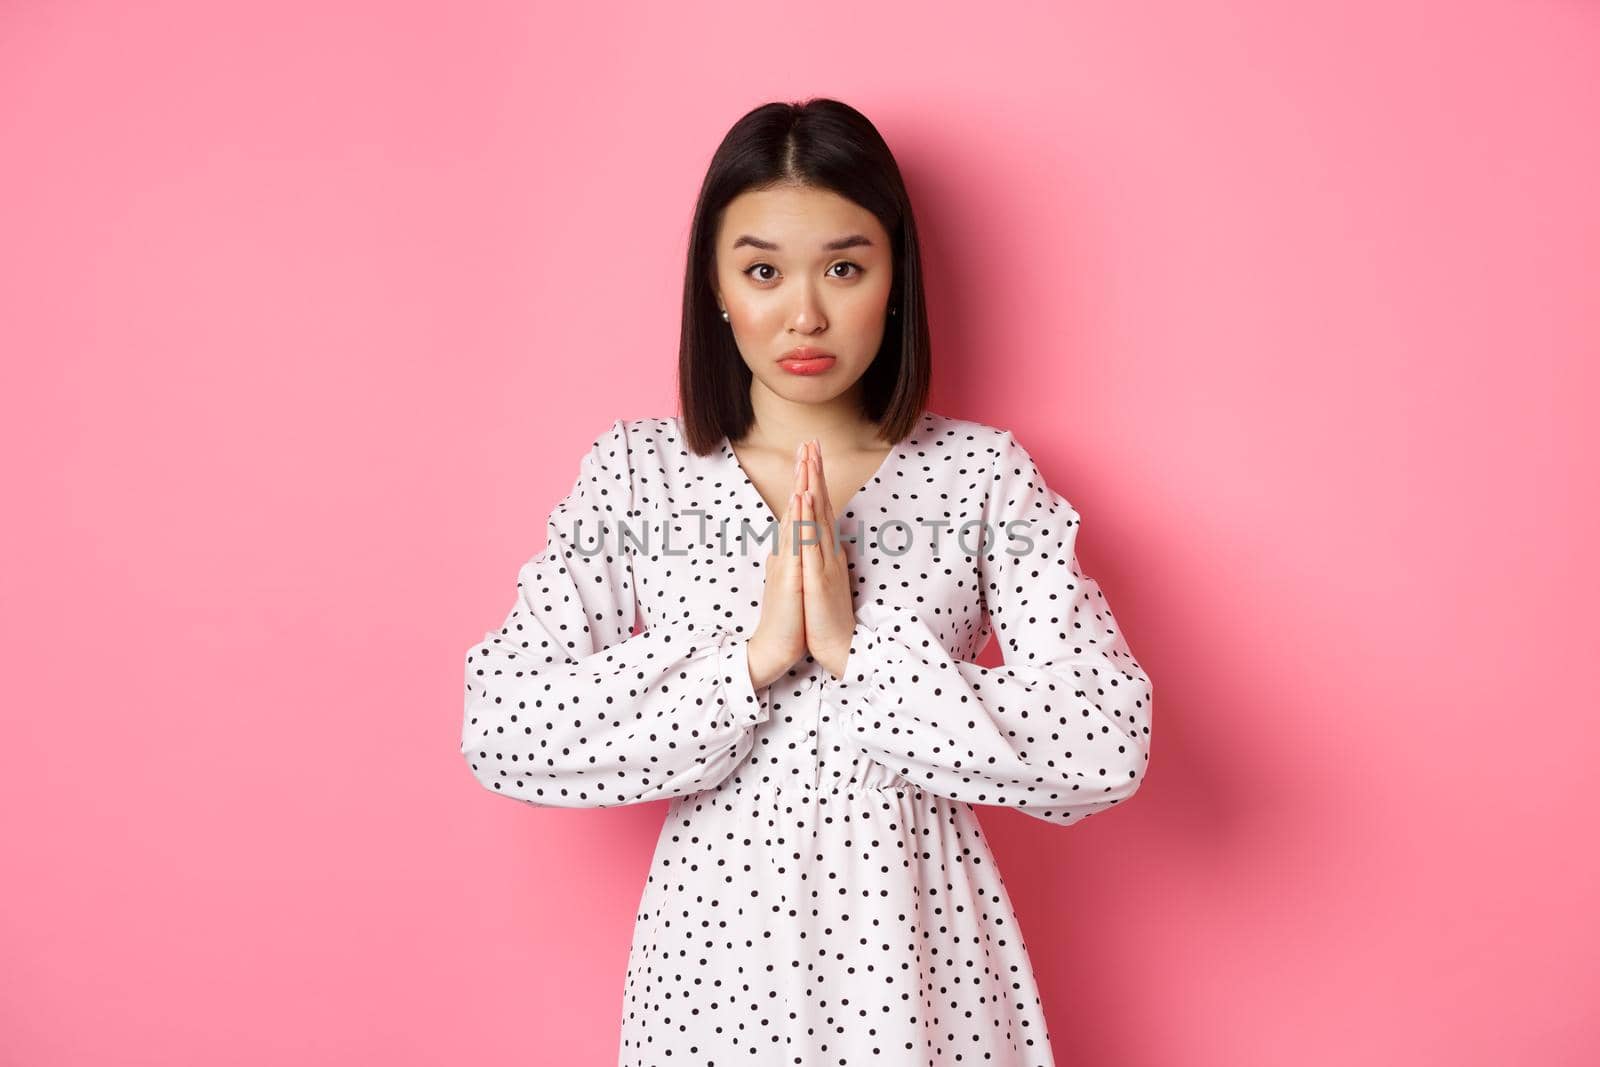 Cute asian girl asking for help, begging for favour and looking innocent at camera, pleading against pink background.